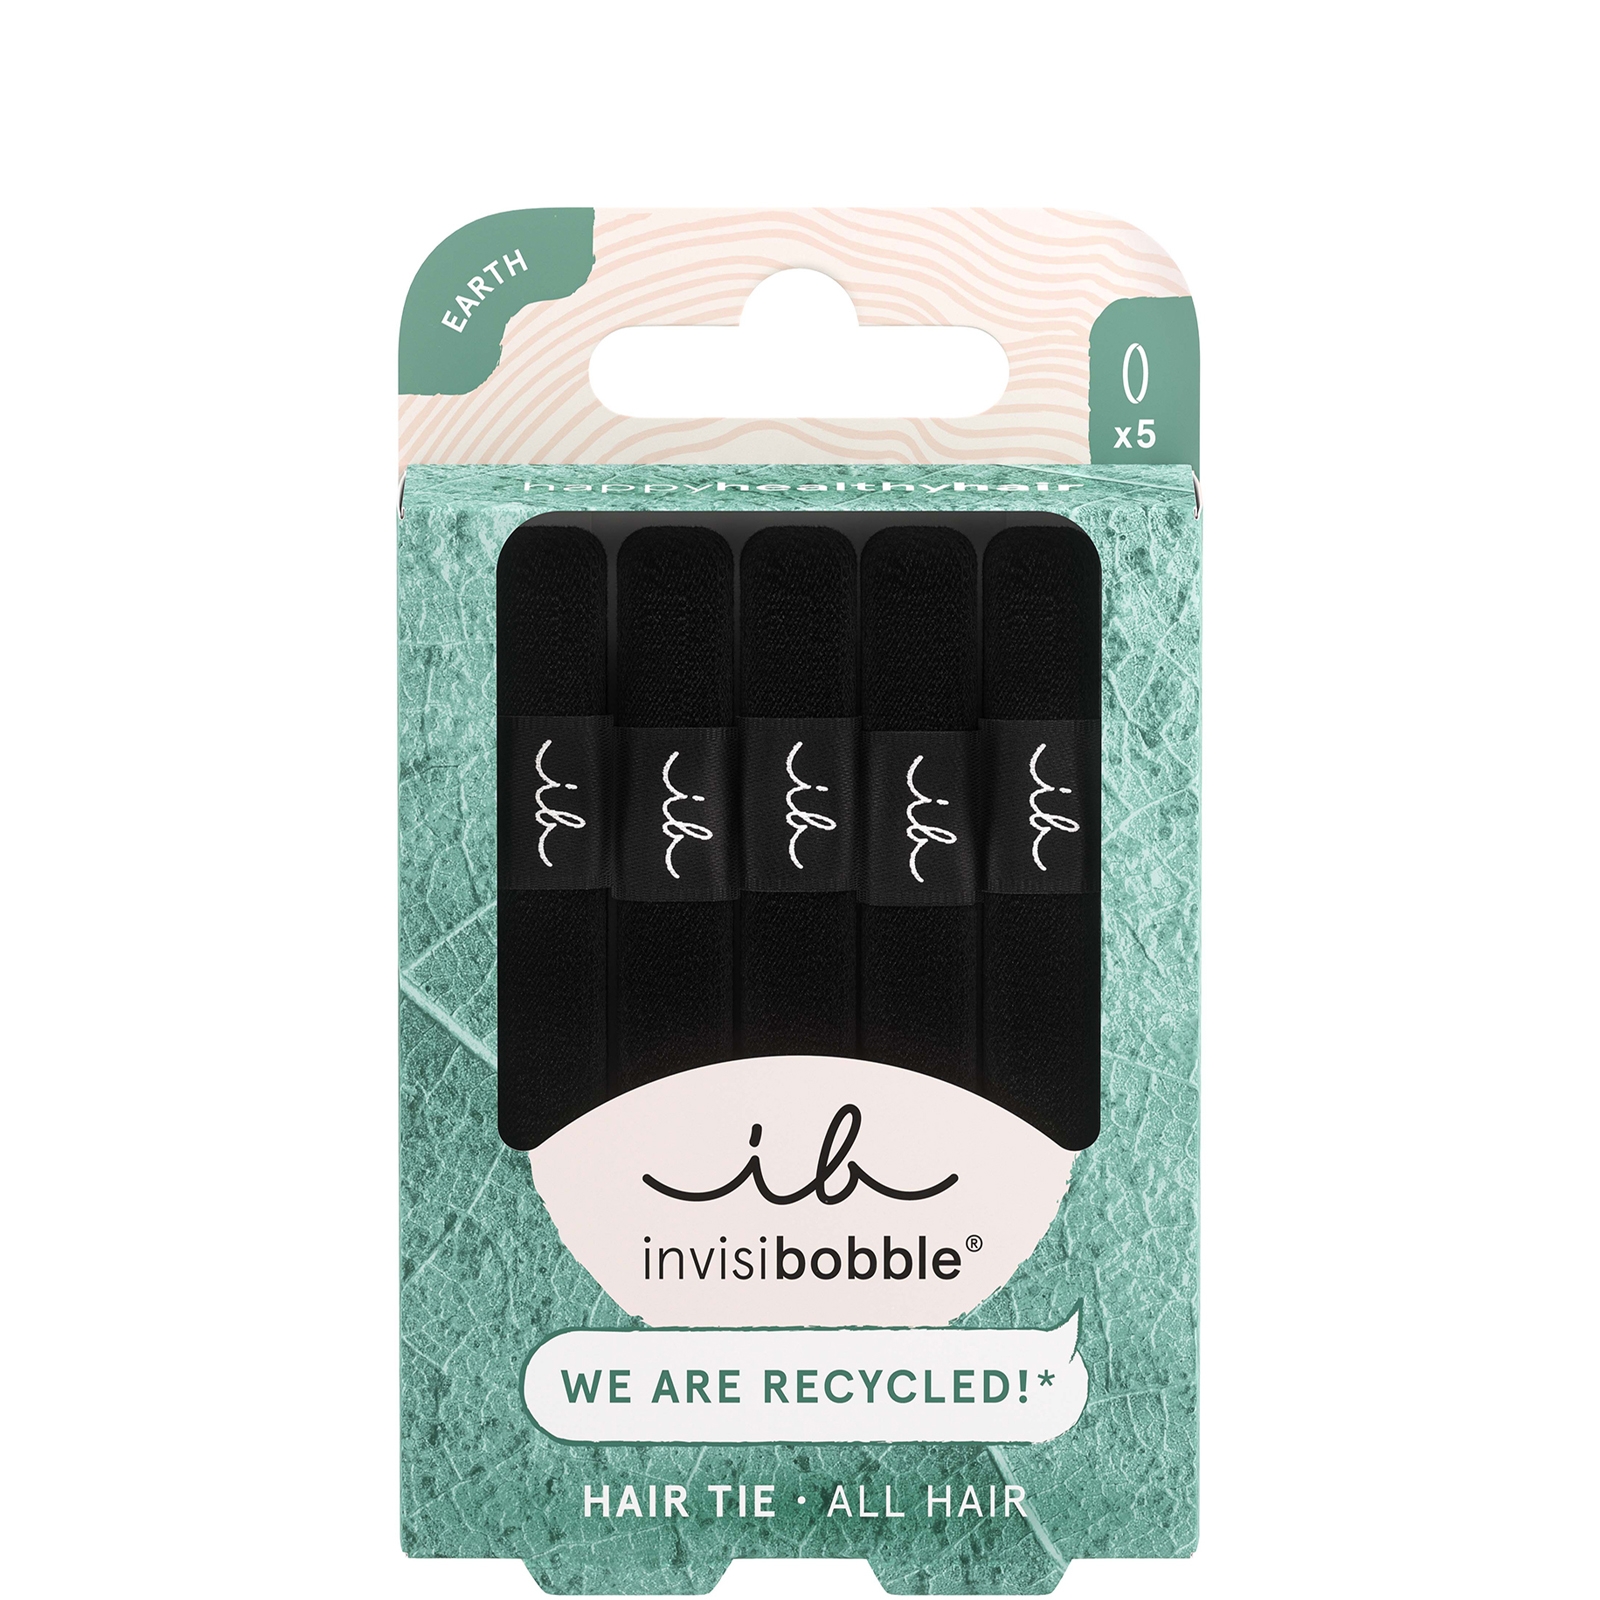 Shop Invisibobble Hair Tie Black - Pack Of 5